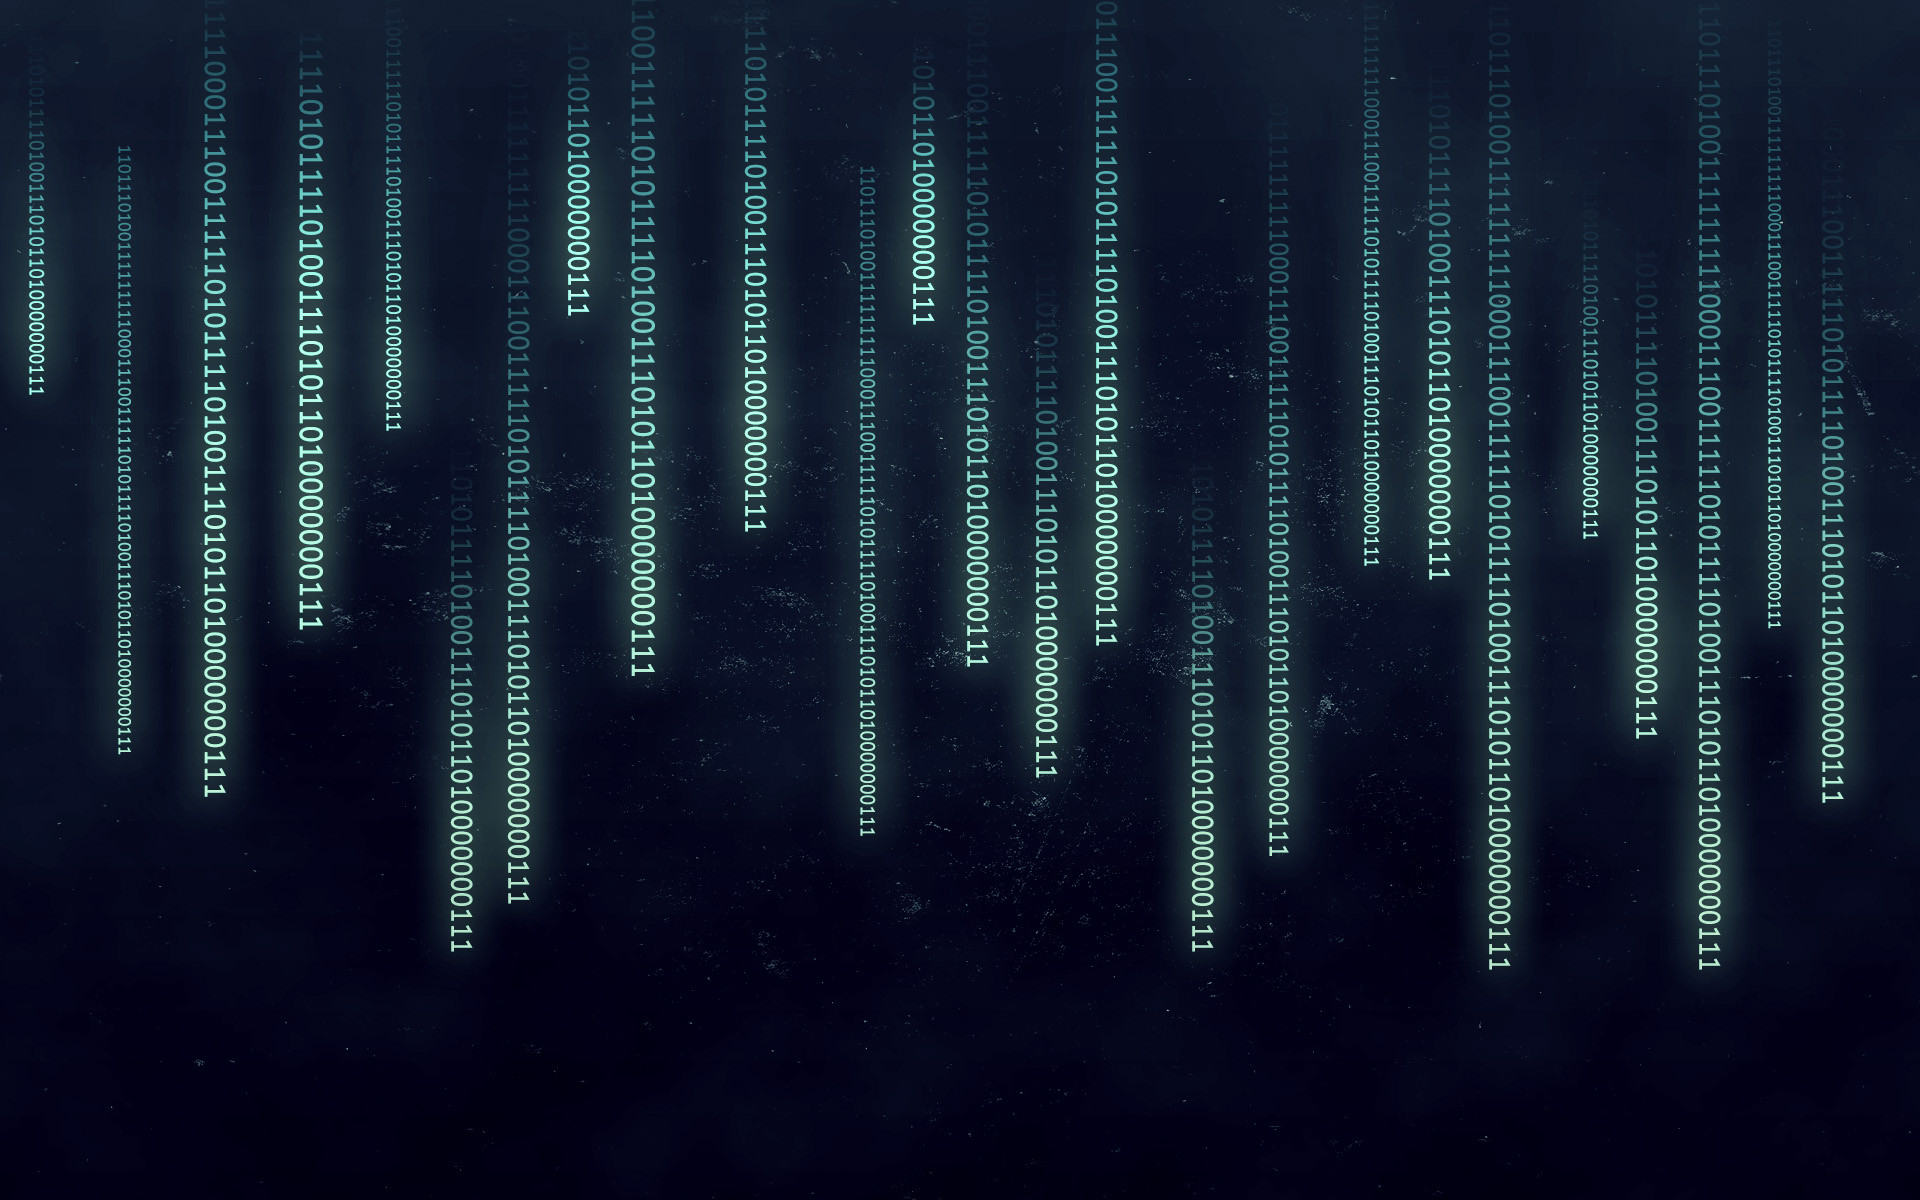 73 Binary Code Wallpapers images in the best available resolution